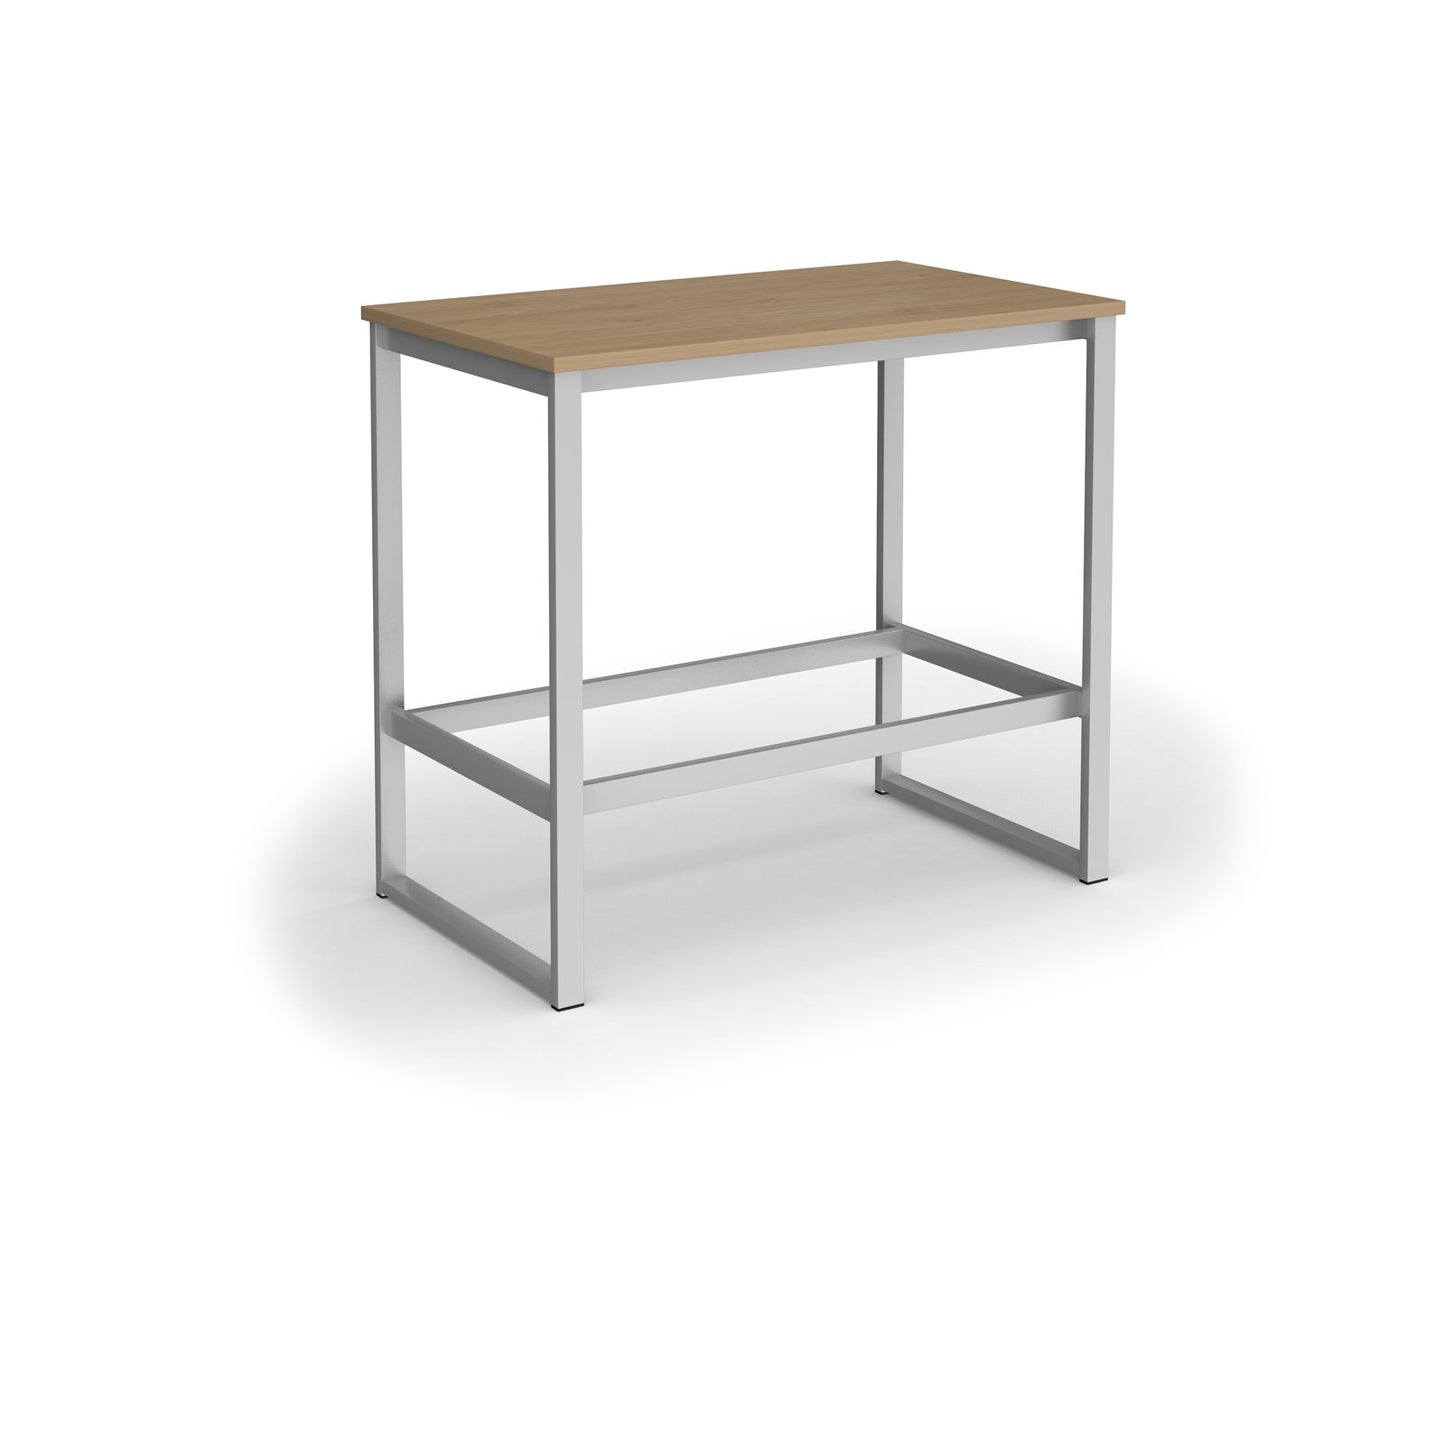 Otto Poseur dining table